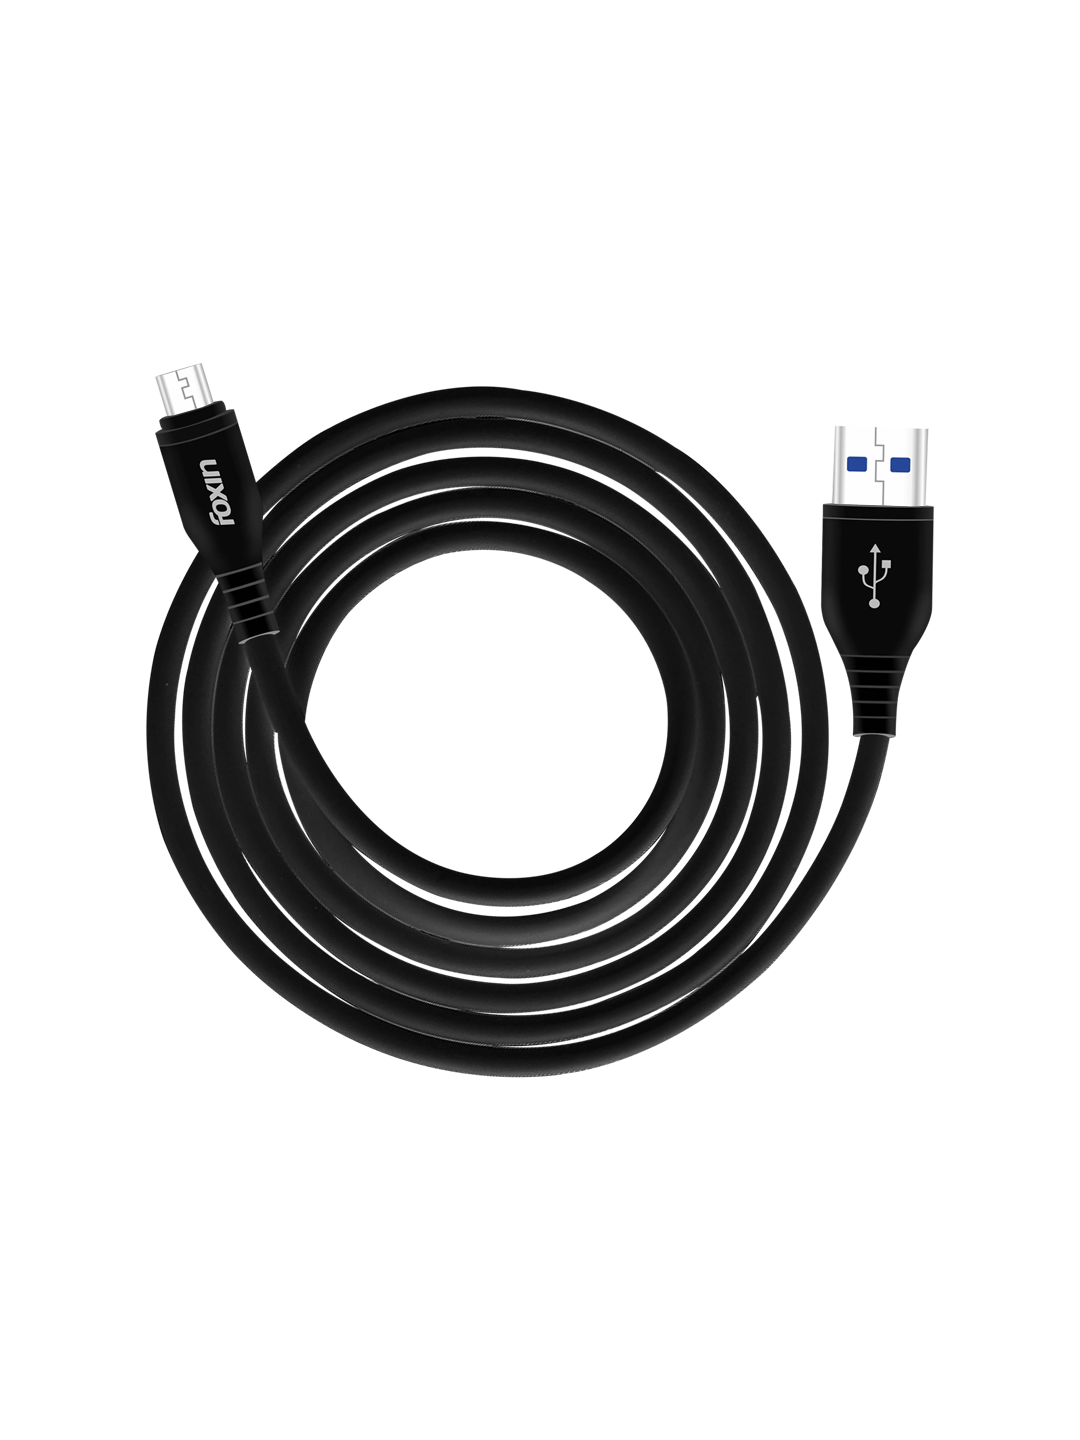 Foxin ME031 Micro USB Cable with Amp rapid charging | 18 output - Brand